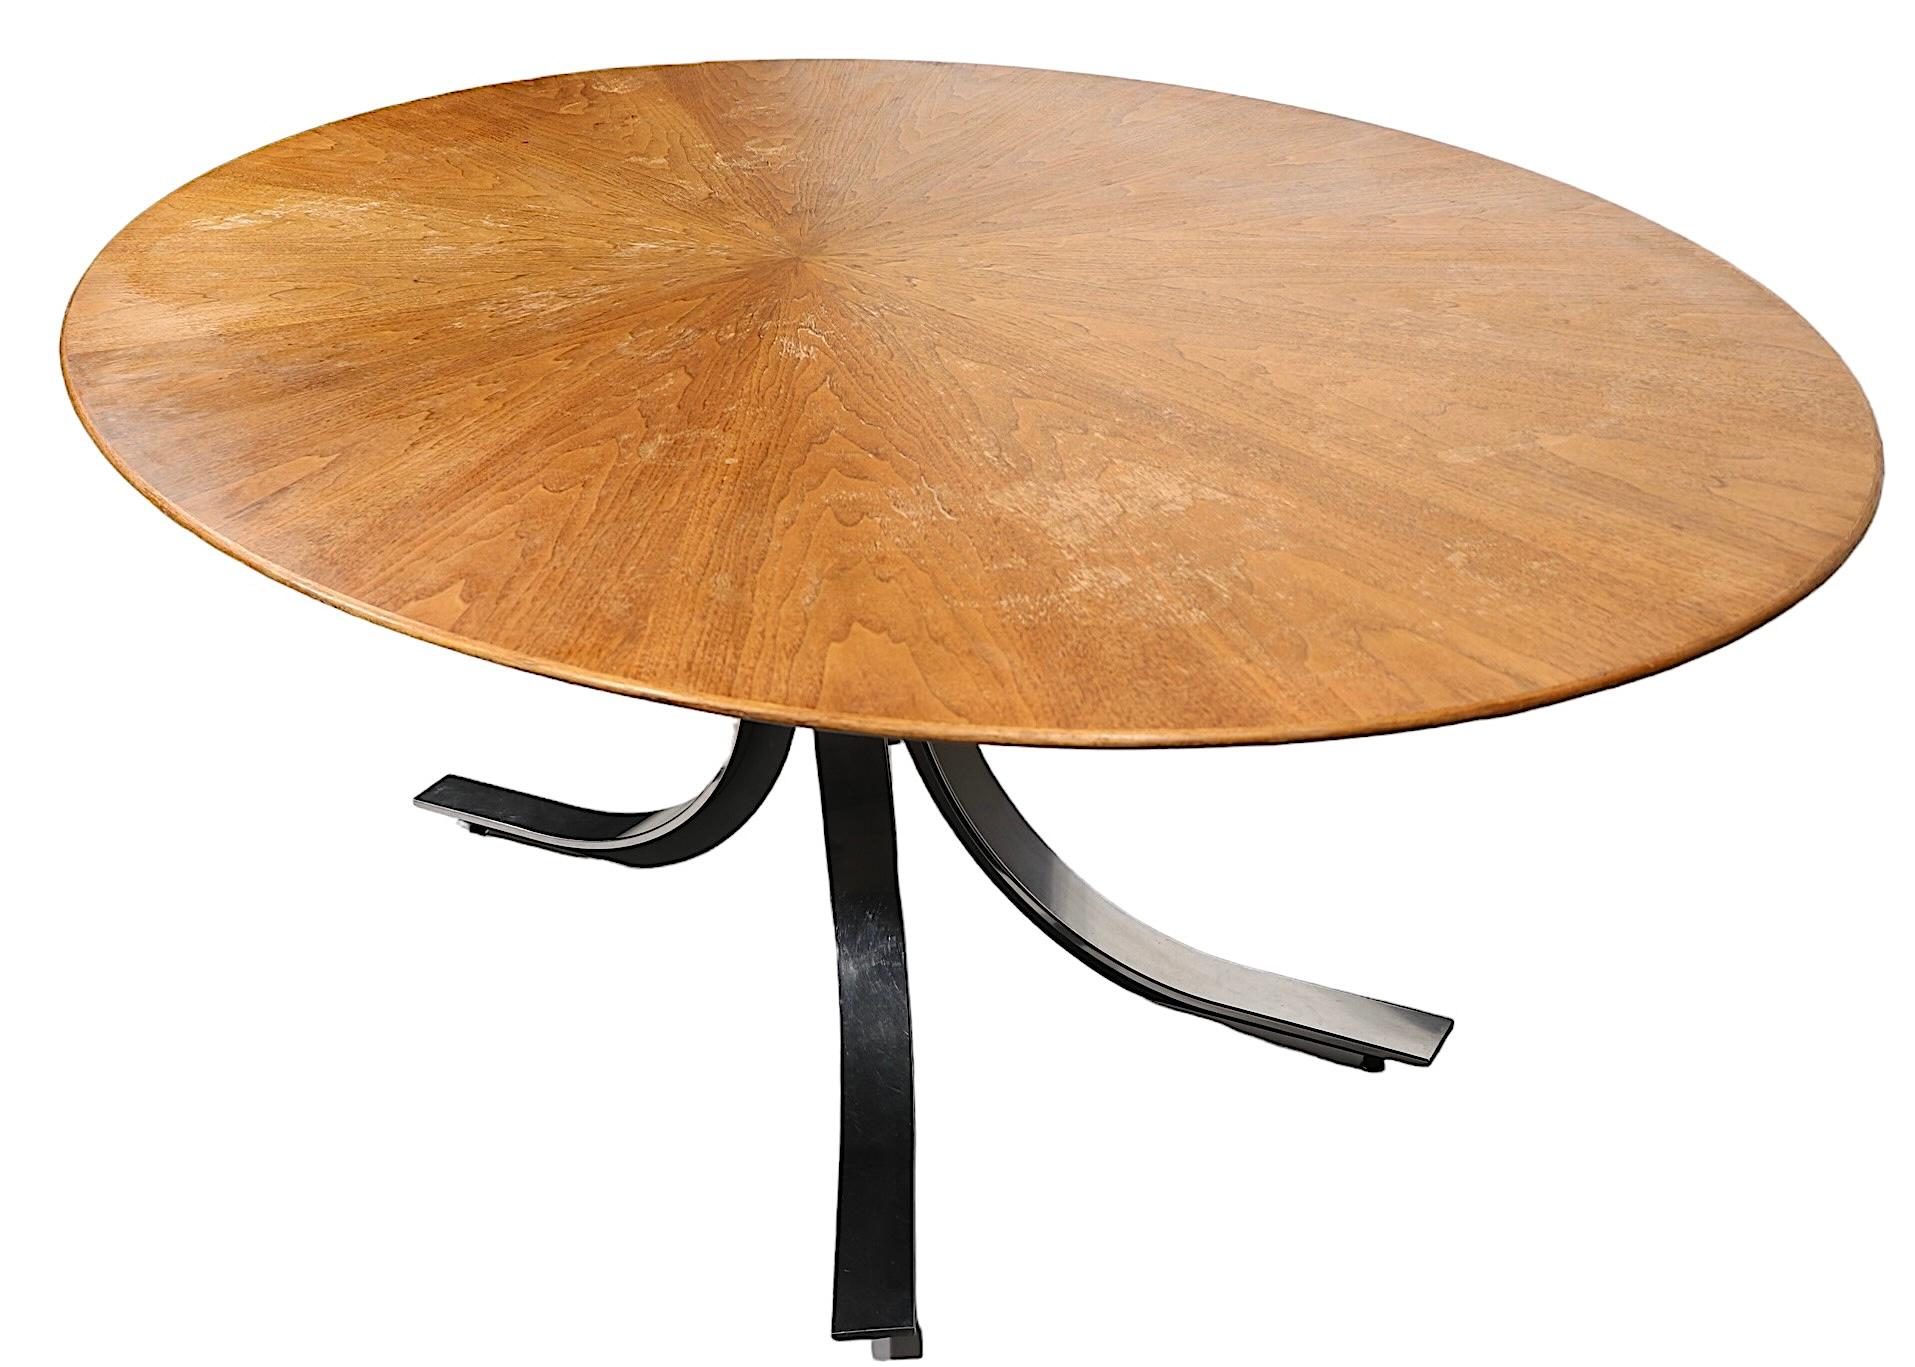 Voguish, sophisticated, and chic conference dining table designed by Osvaldo Borsani, for Stow Davis. The table has a large oval top with a radiating starburst pattern, of  matching walnut veneer panels that expand from the center, and a dramatic